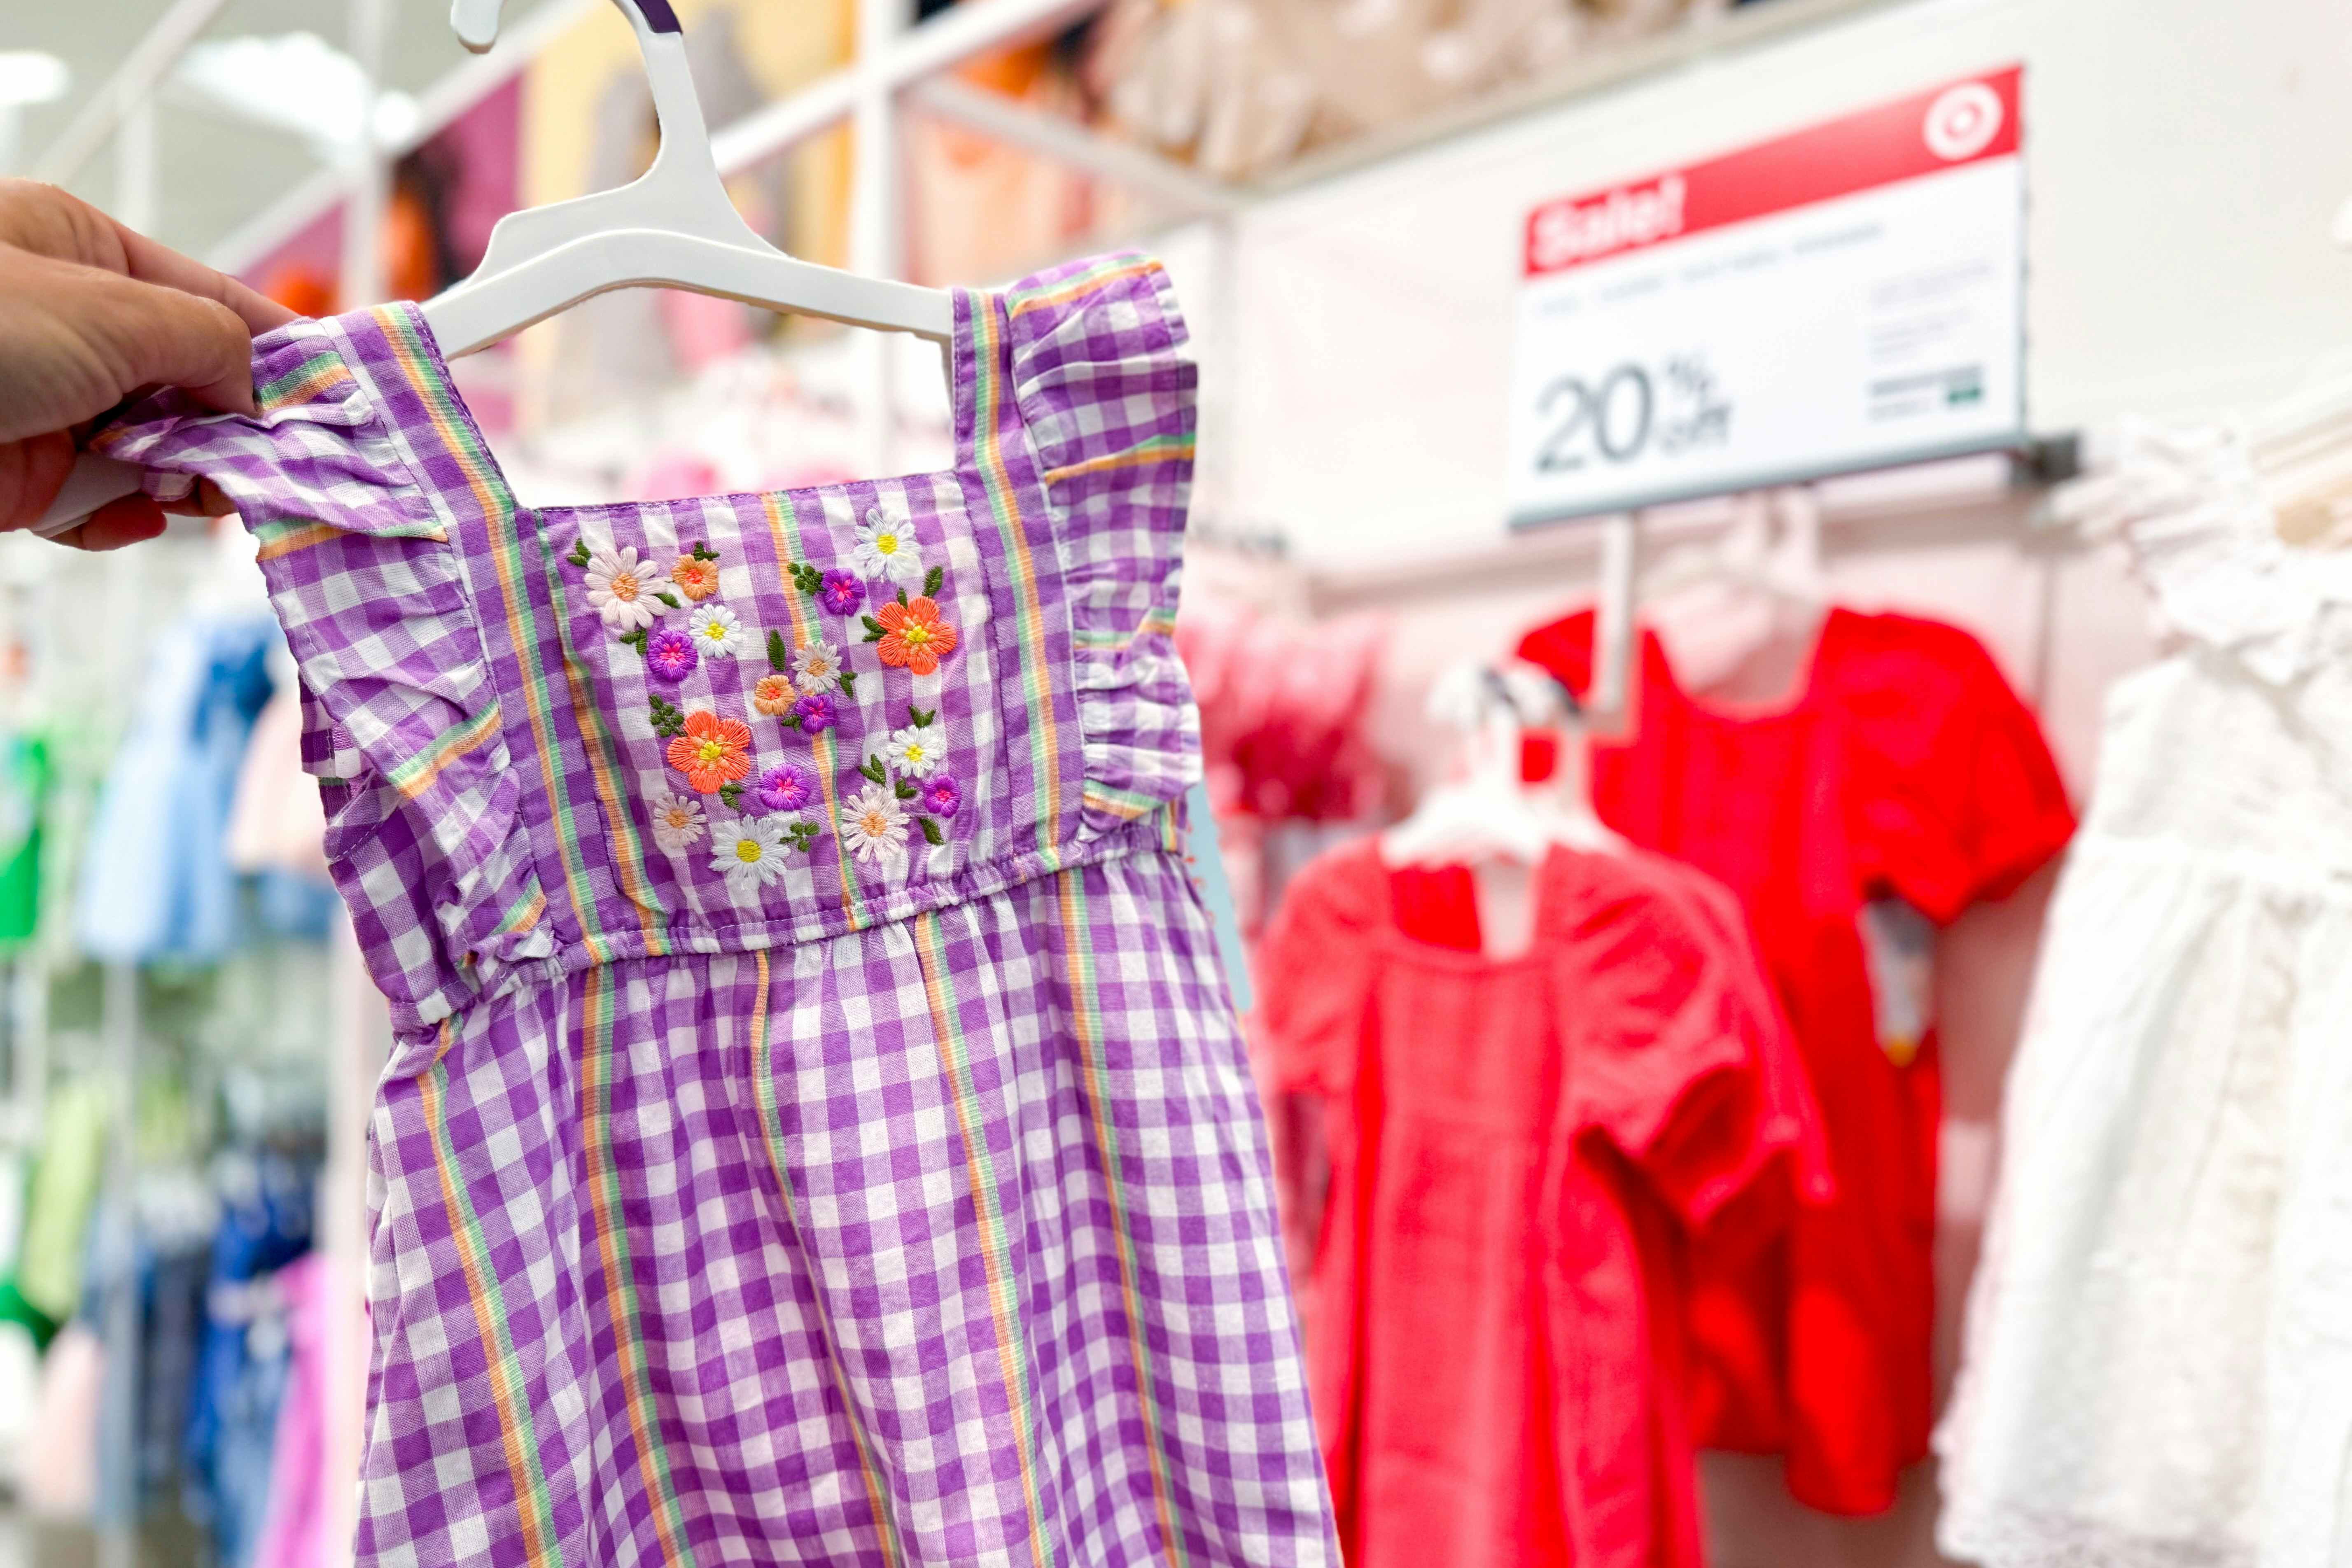 Children's Spring Apparel Sale at Target: $6 Dresses, Shorts, and More